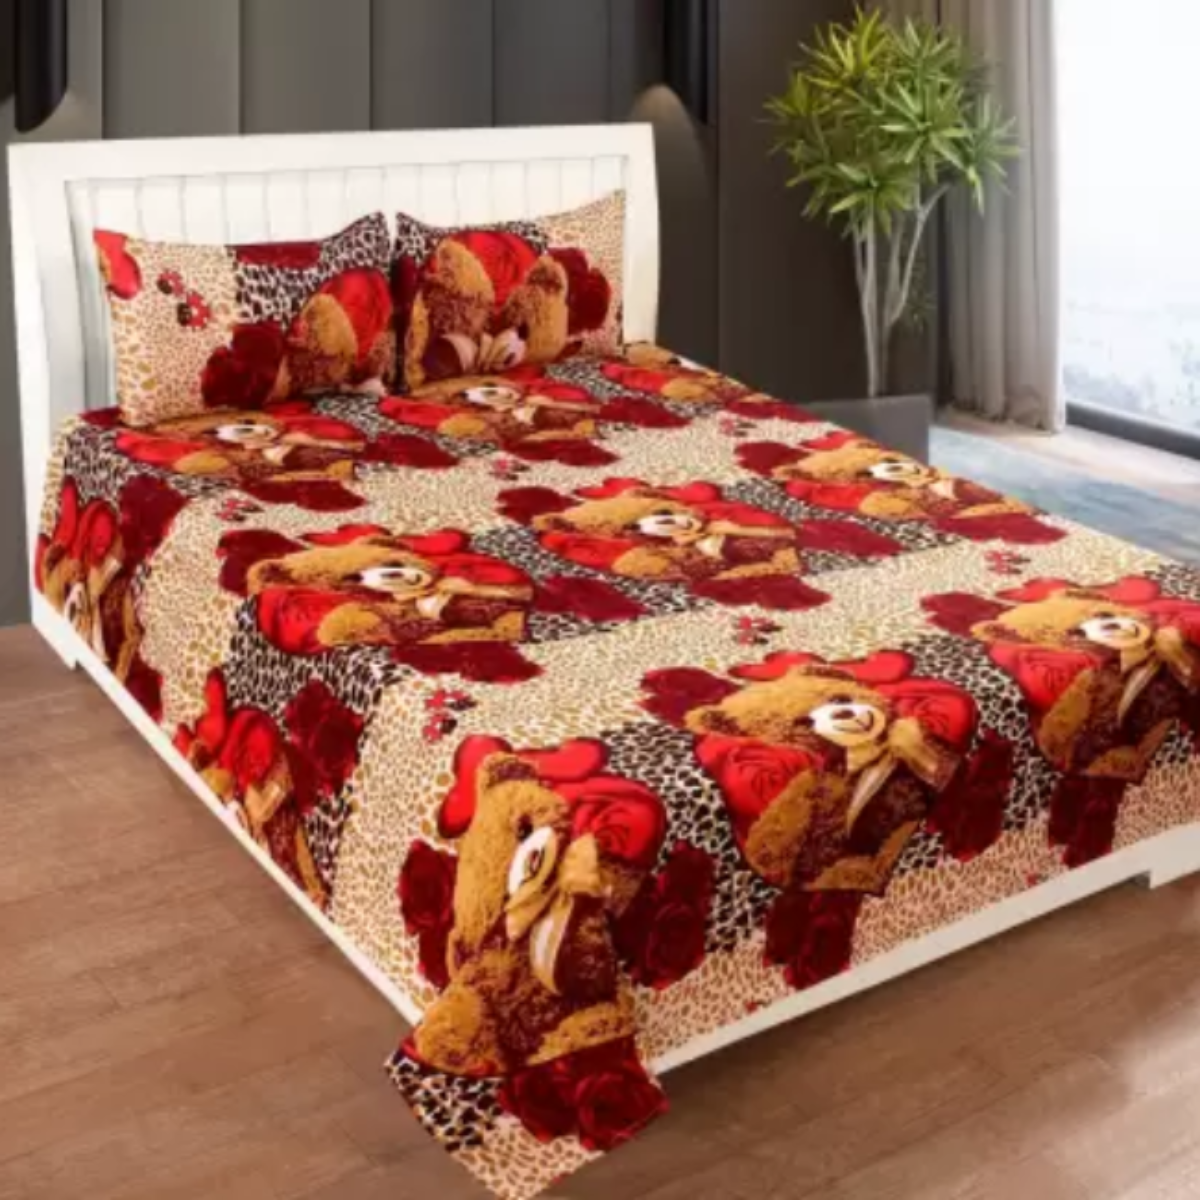 SPRINGSTONE POLYCOTTON DOUBLE PRINTED FLAT BEDSHEET ARTICLE NO HFDBSSD6M